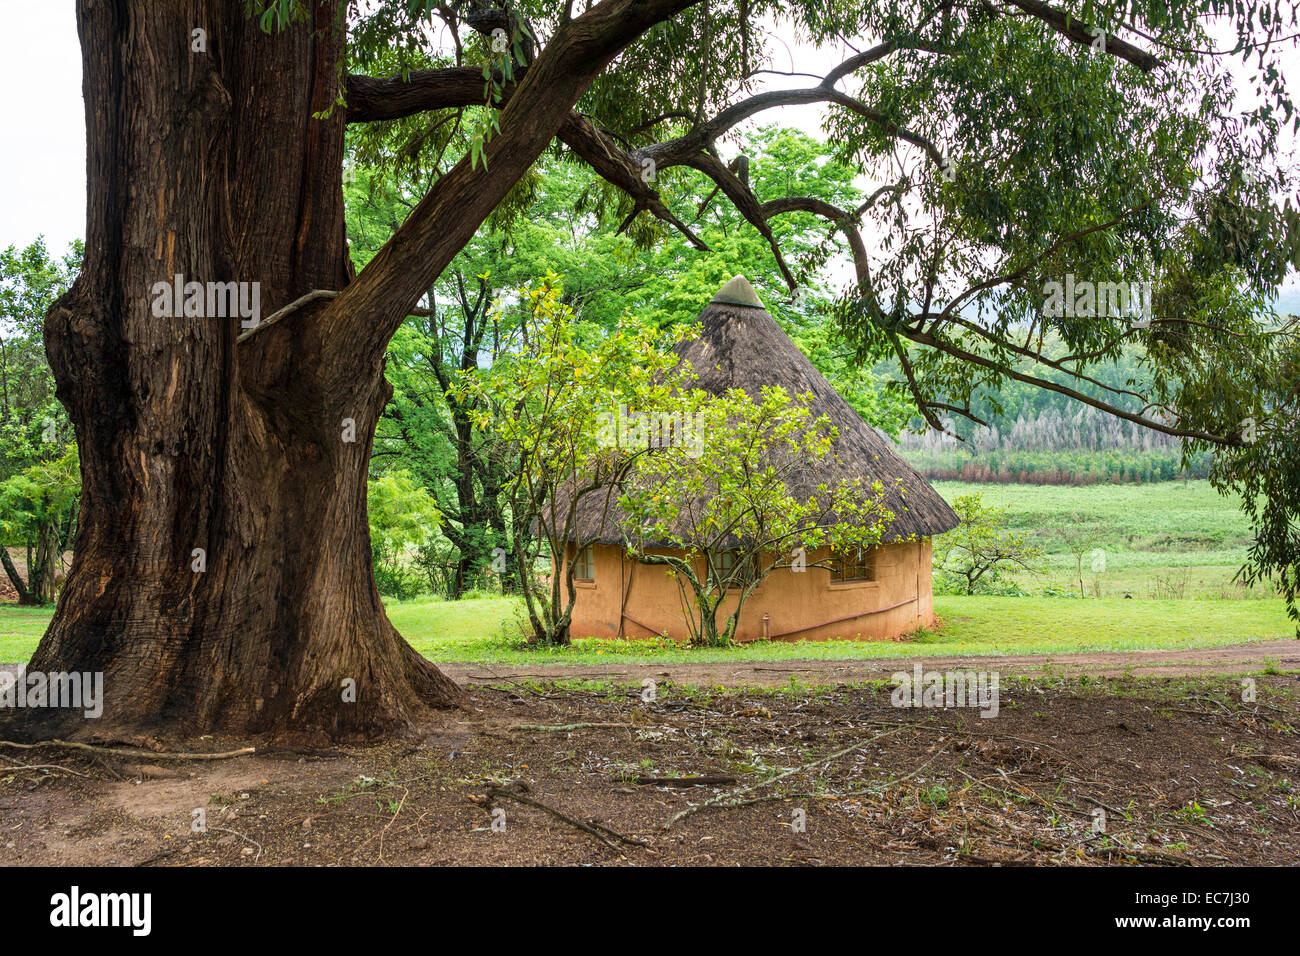 African round hut with thatched roof, big tree Stock Photo